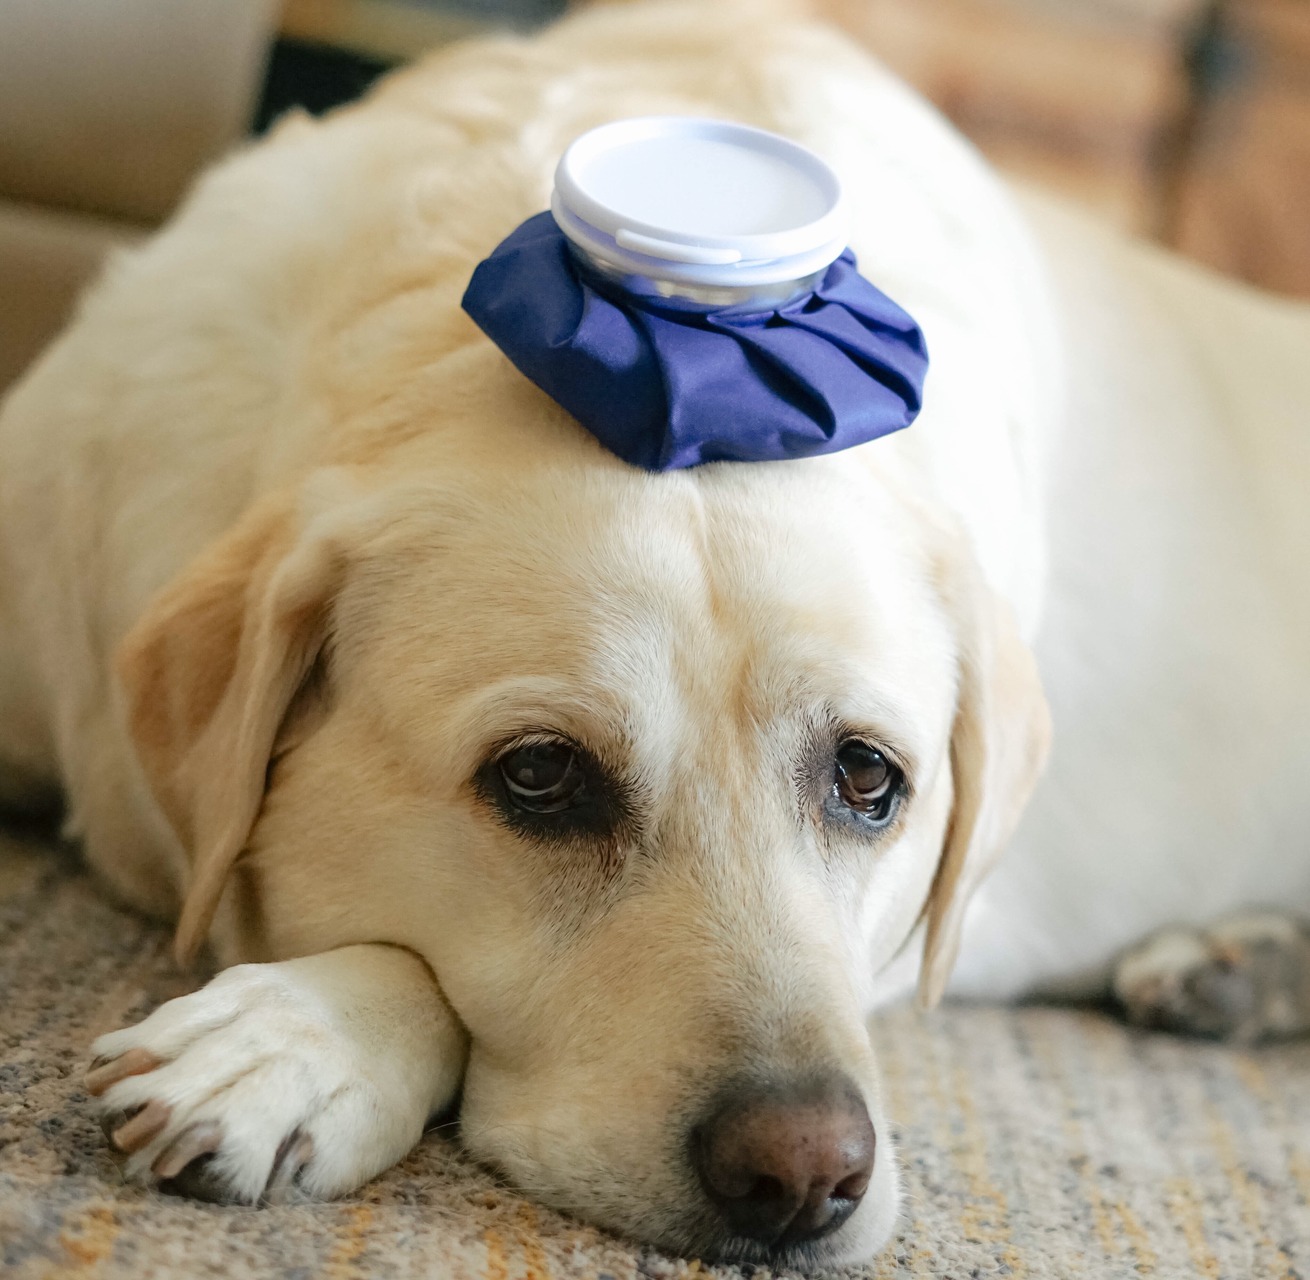 A sick dog sitting with a blue ice pack on their head